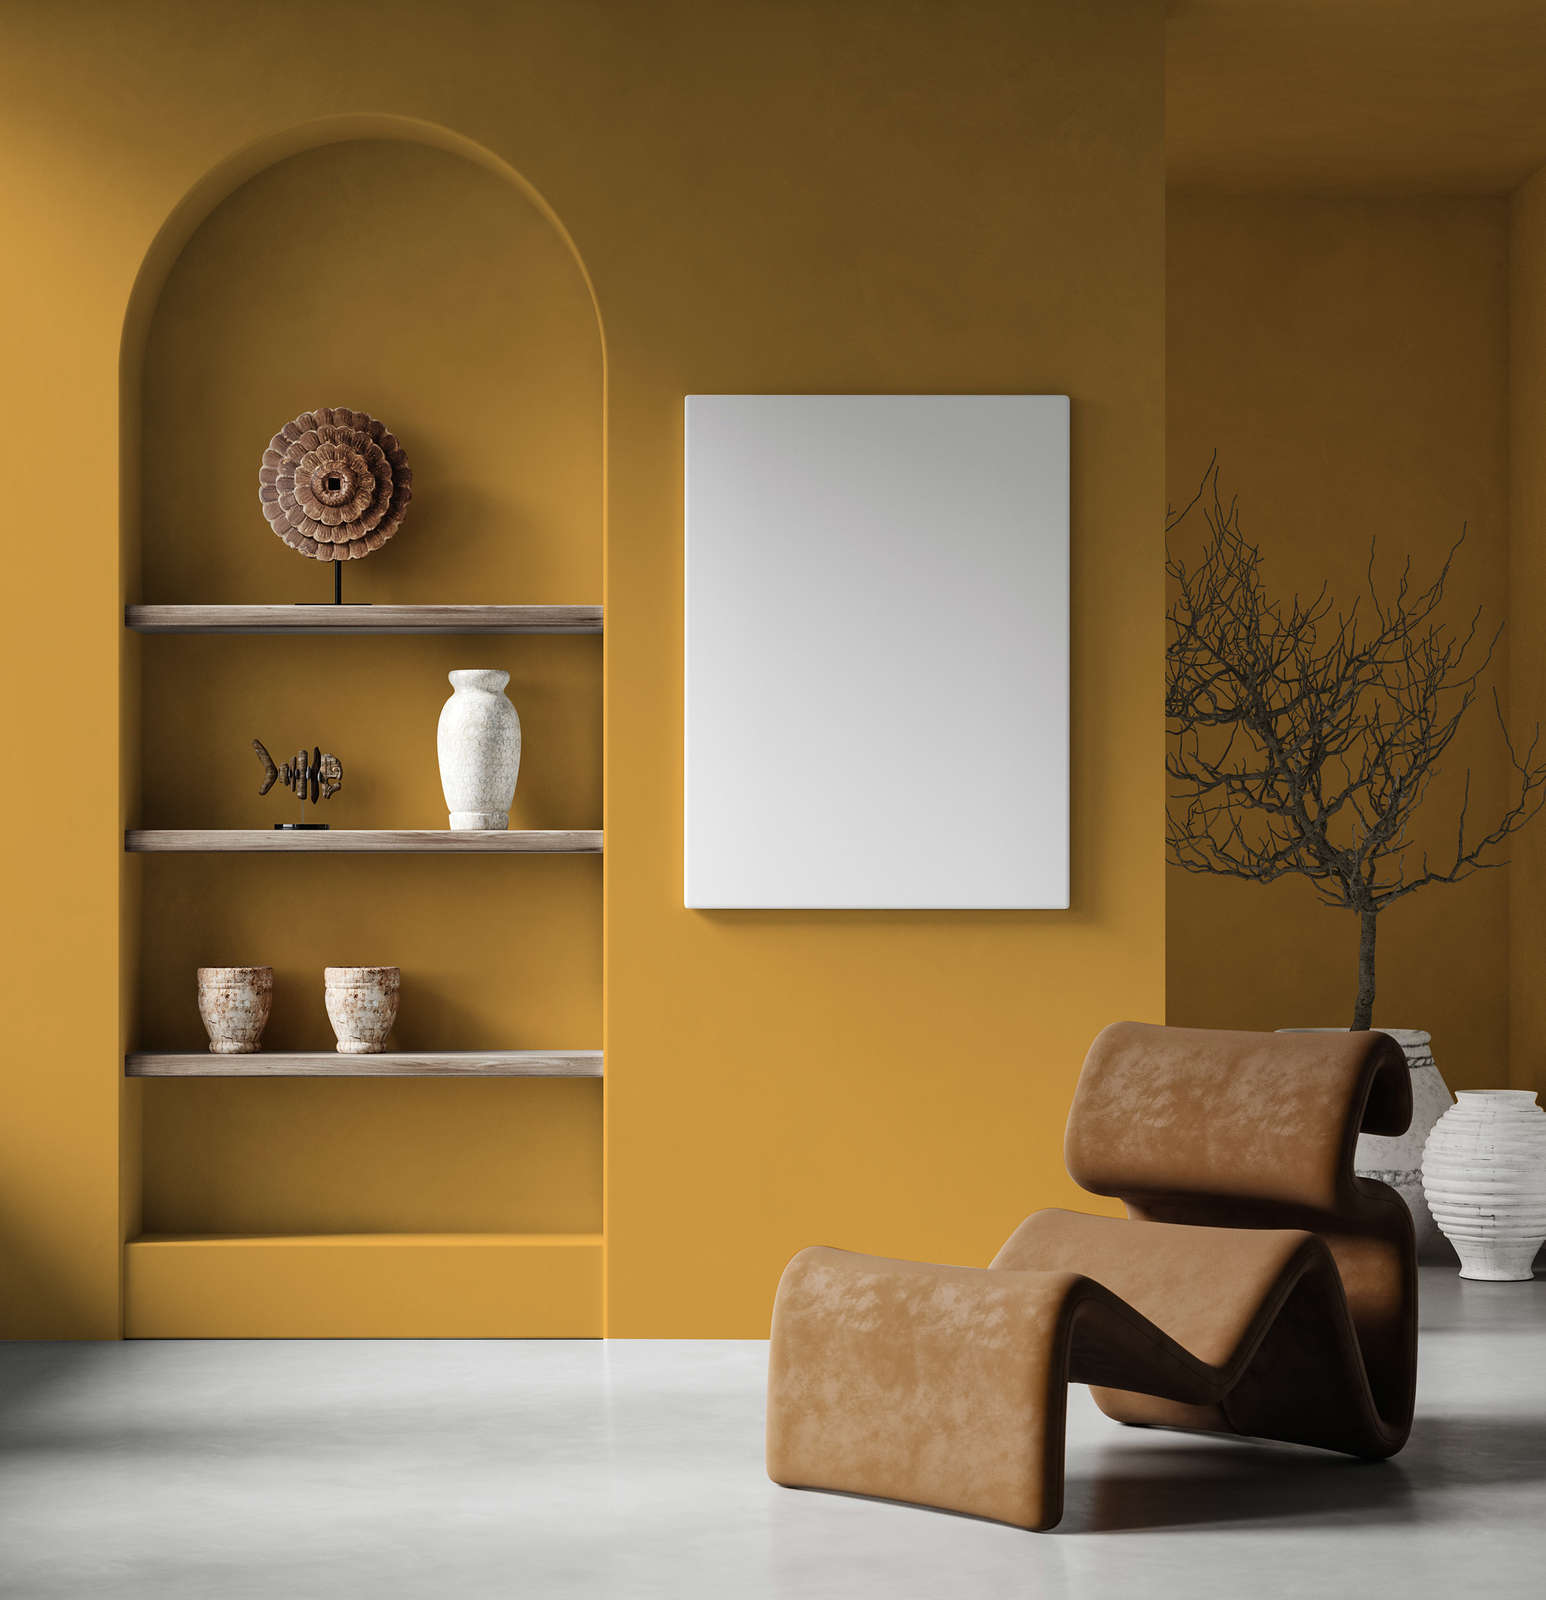             Premium Wall Paint strong saffron yellow »Juicy Yellow« NW806 – 1 litre
        